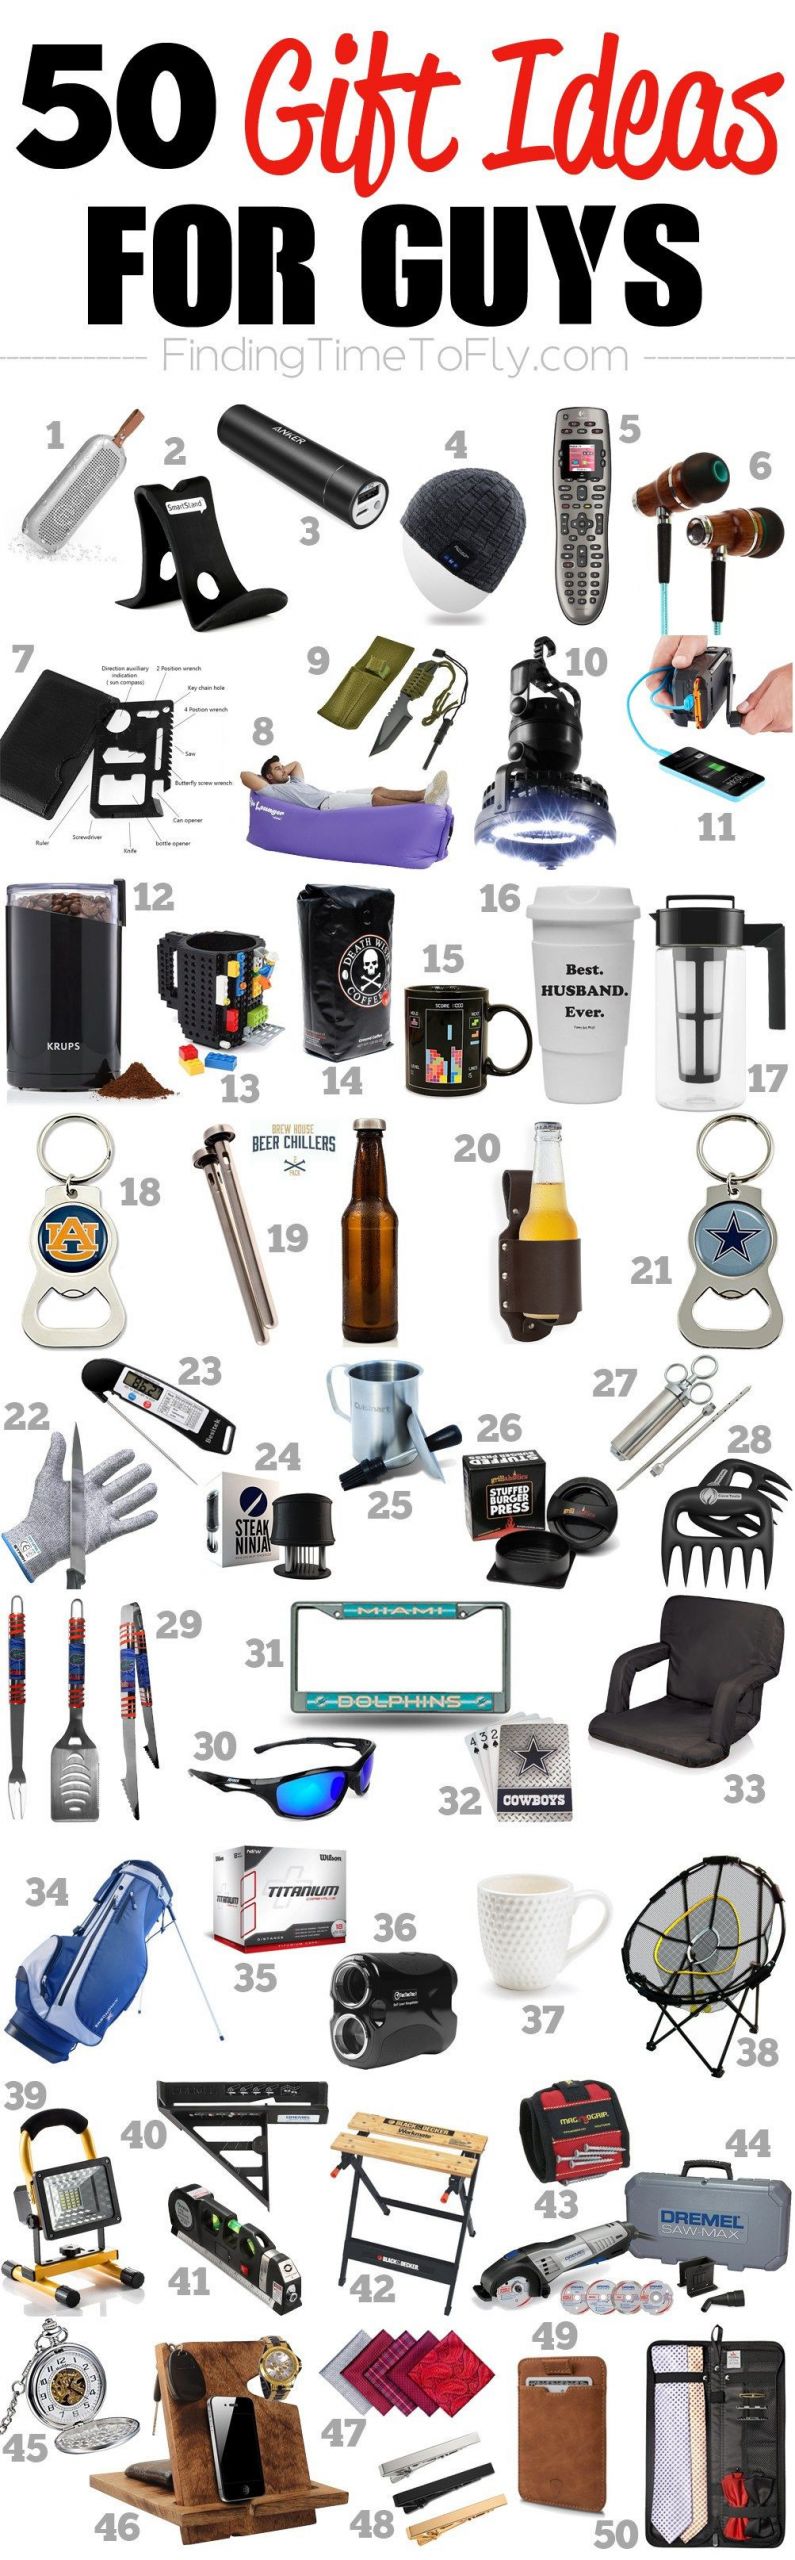 Male Graduation Gift Ideas
 50 Gifts for Guys for Every Occasion